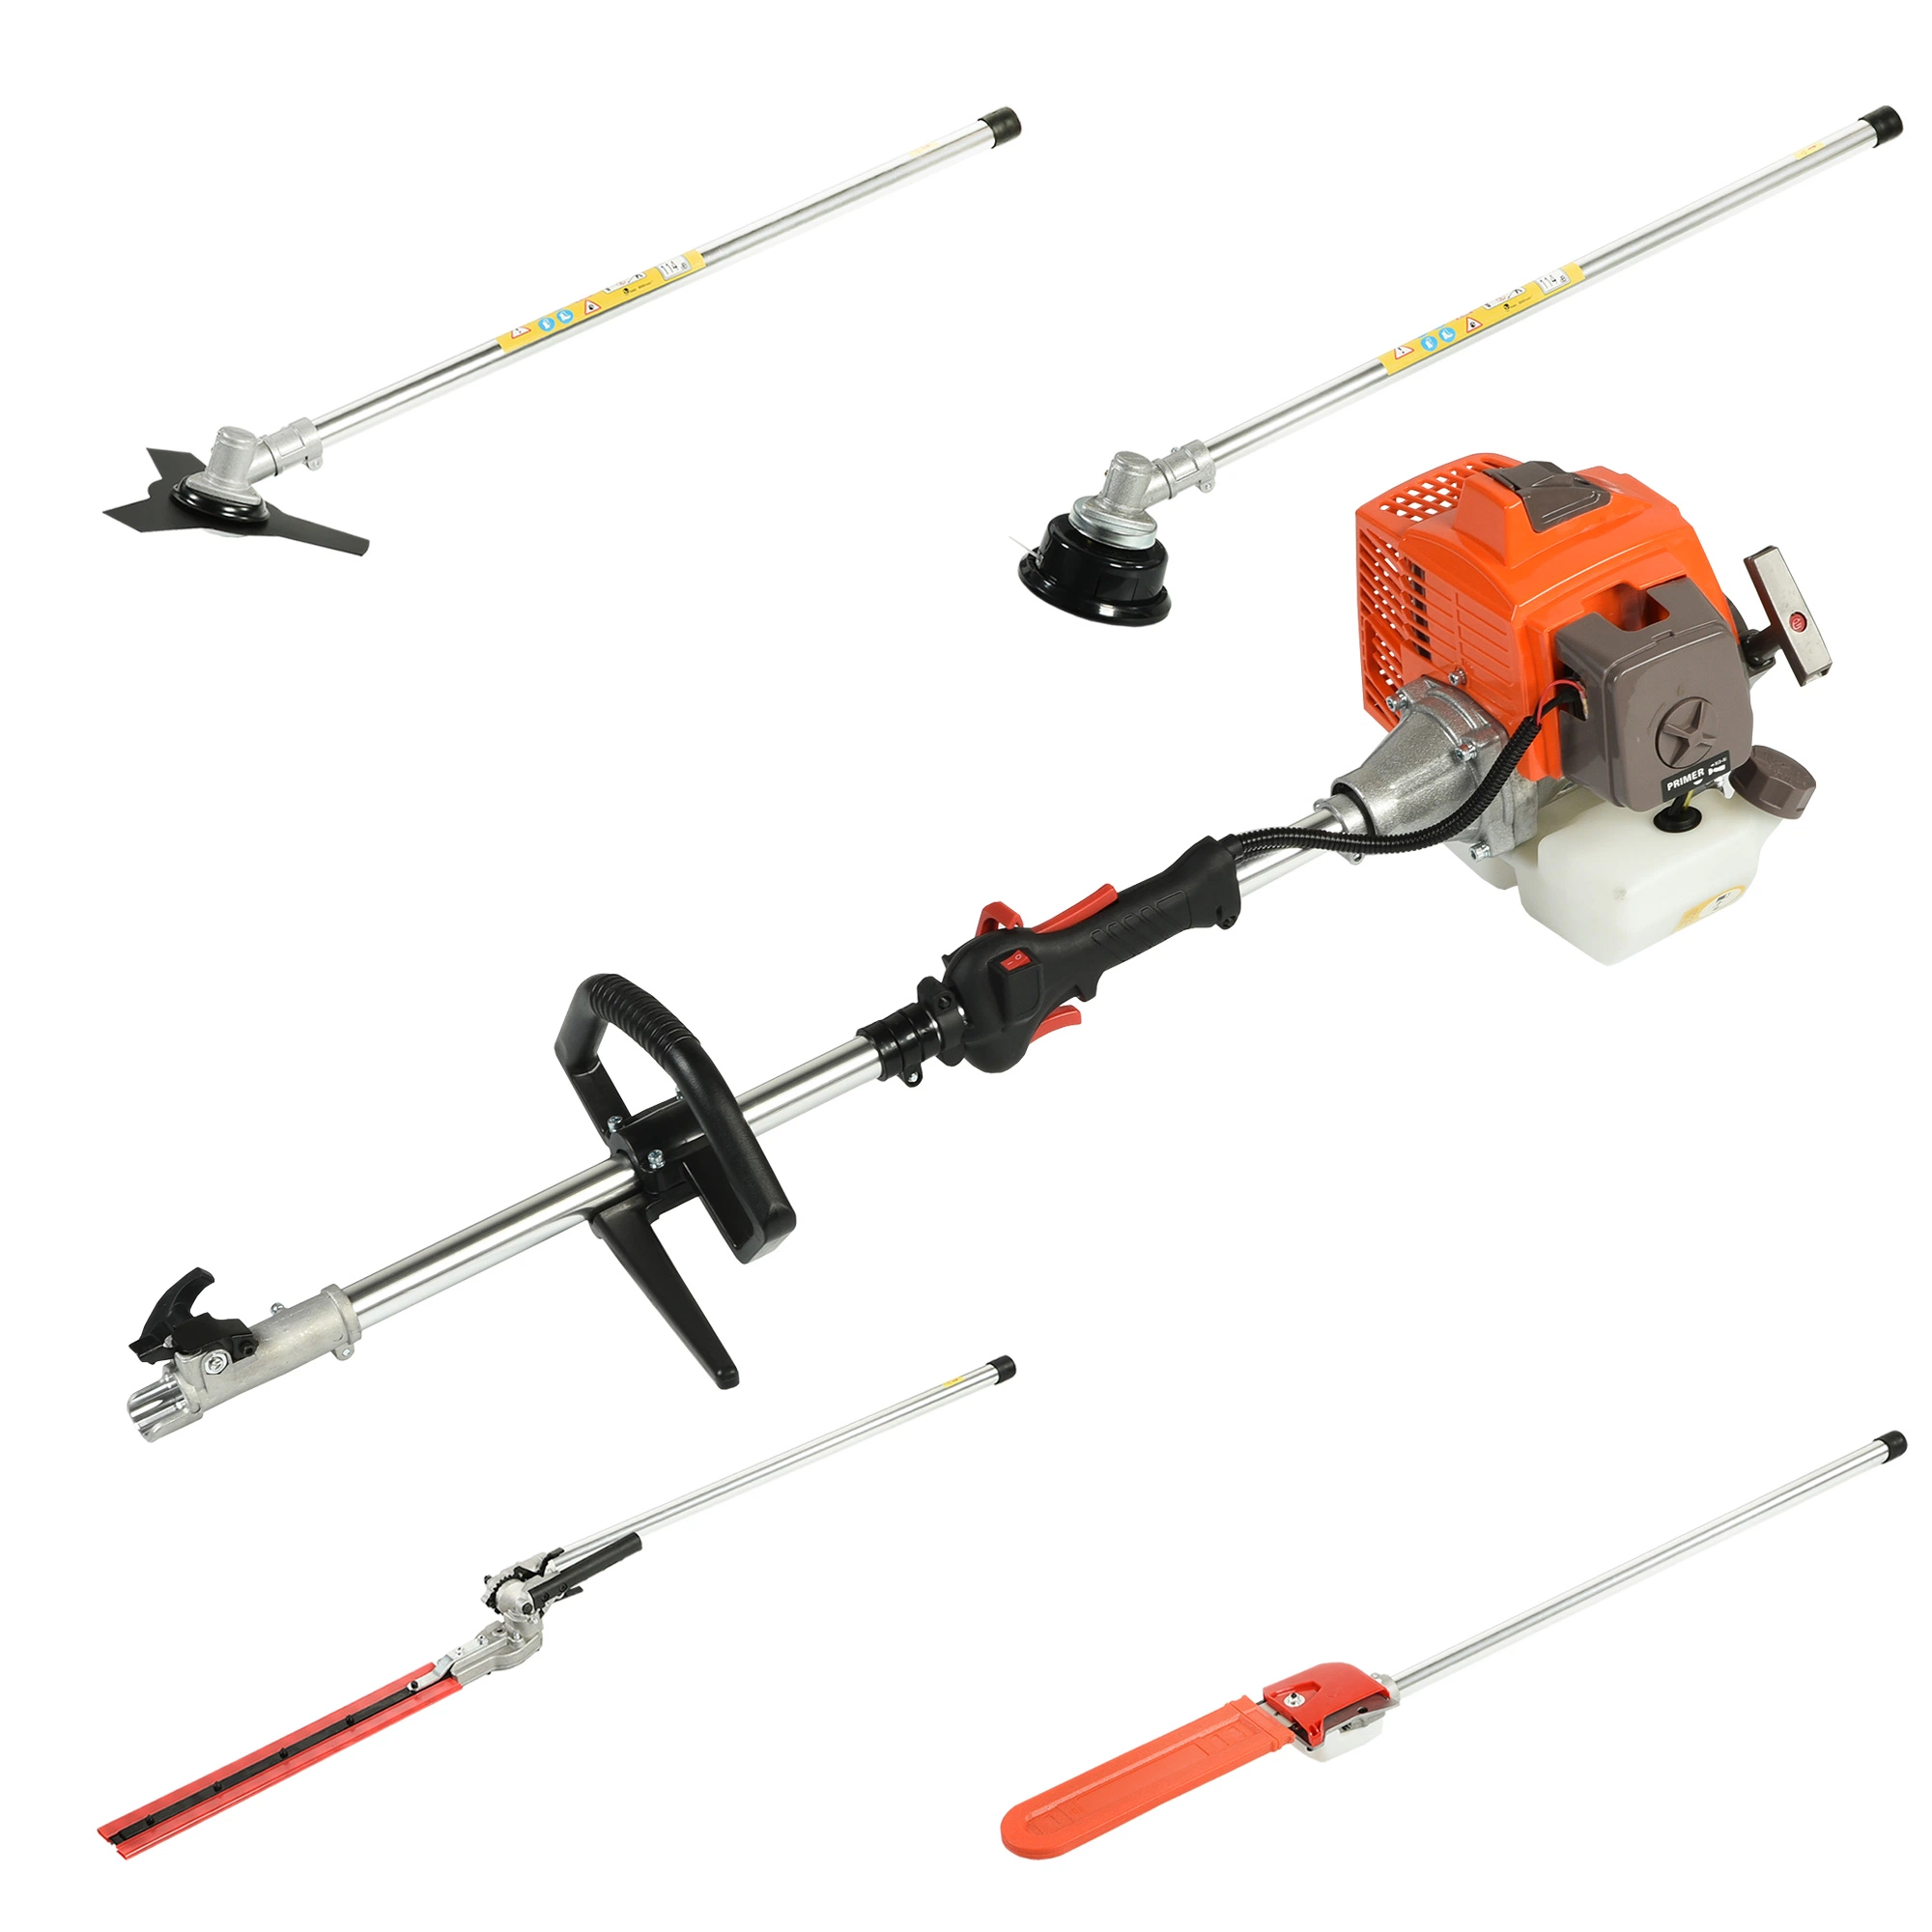 1E48F Engine,63CC Multi Function Brush Cutter Pole Chain Saw Hedge Trimmer